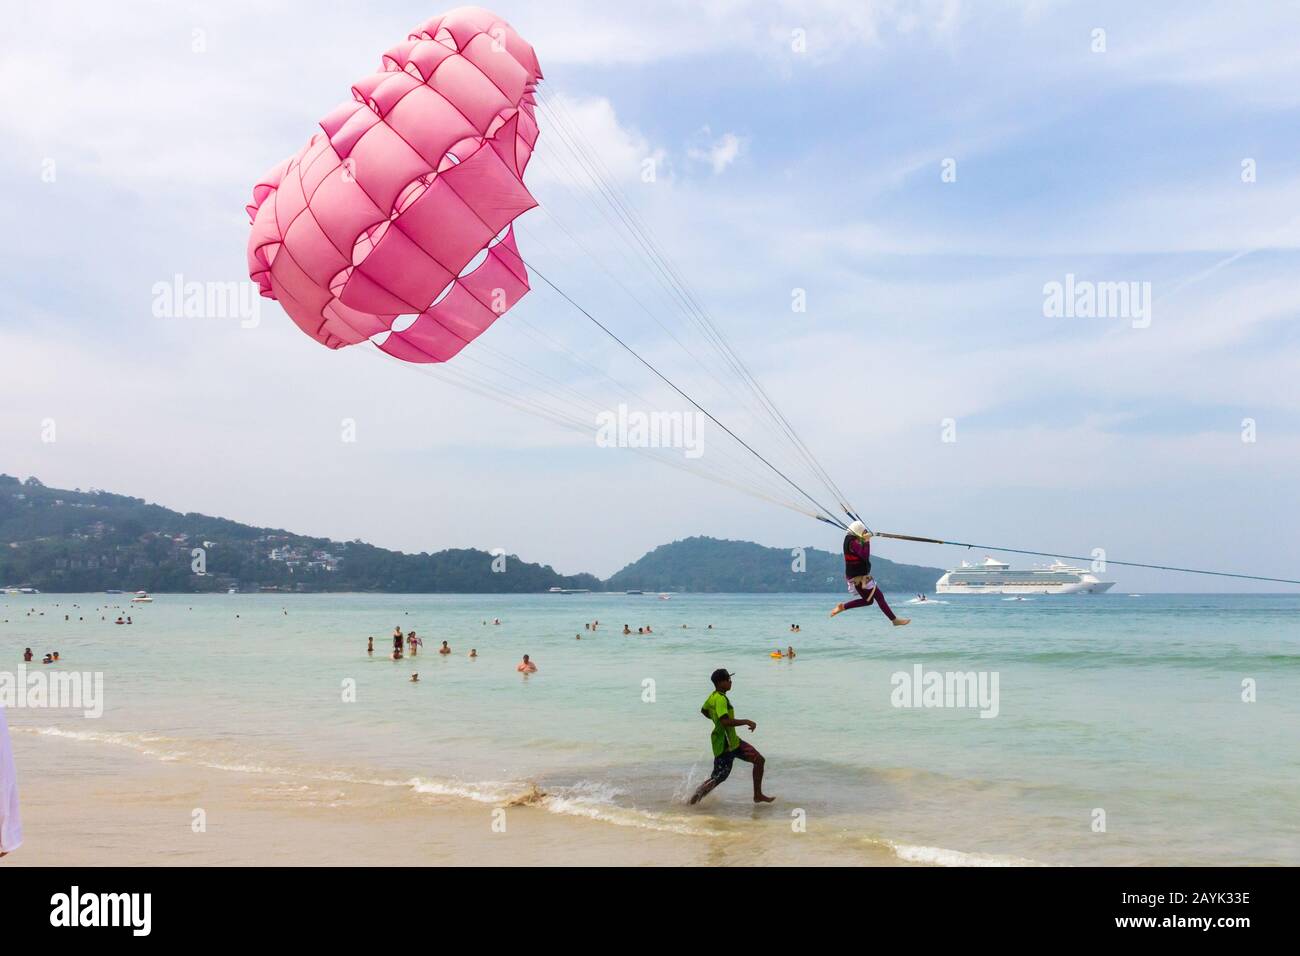 Patong, Phuket, Thailand - November 11th 2017: Parasailing off the beach. This is a popular water sport activity with tourists. Stock Photo